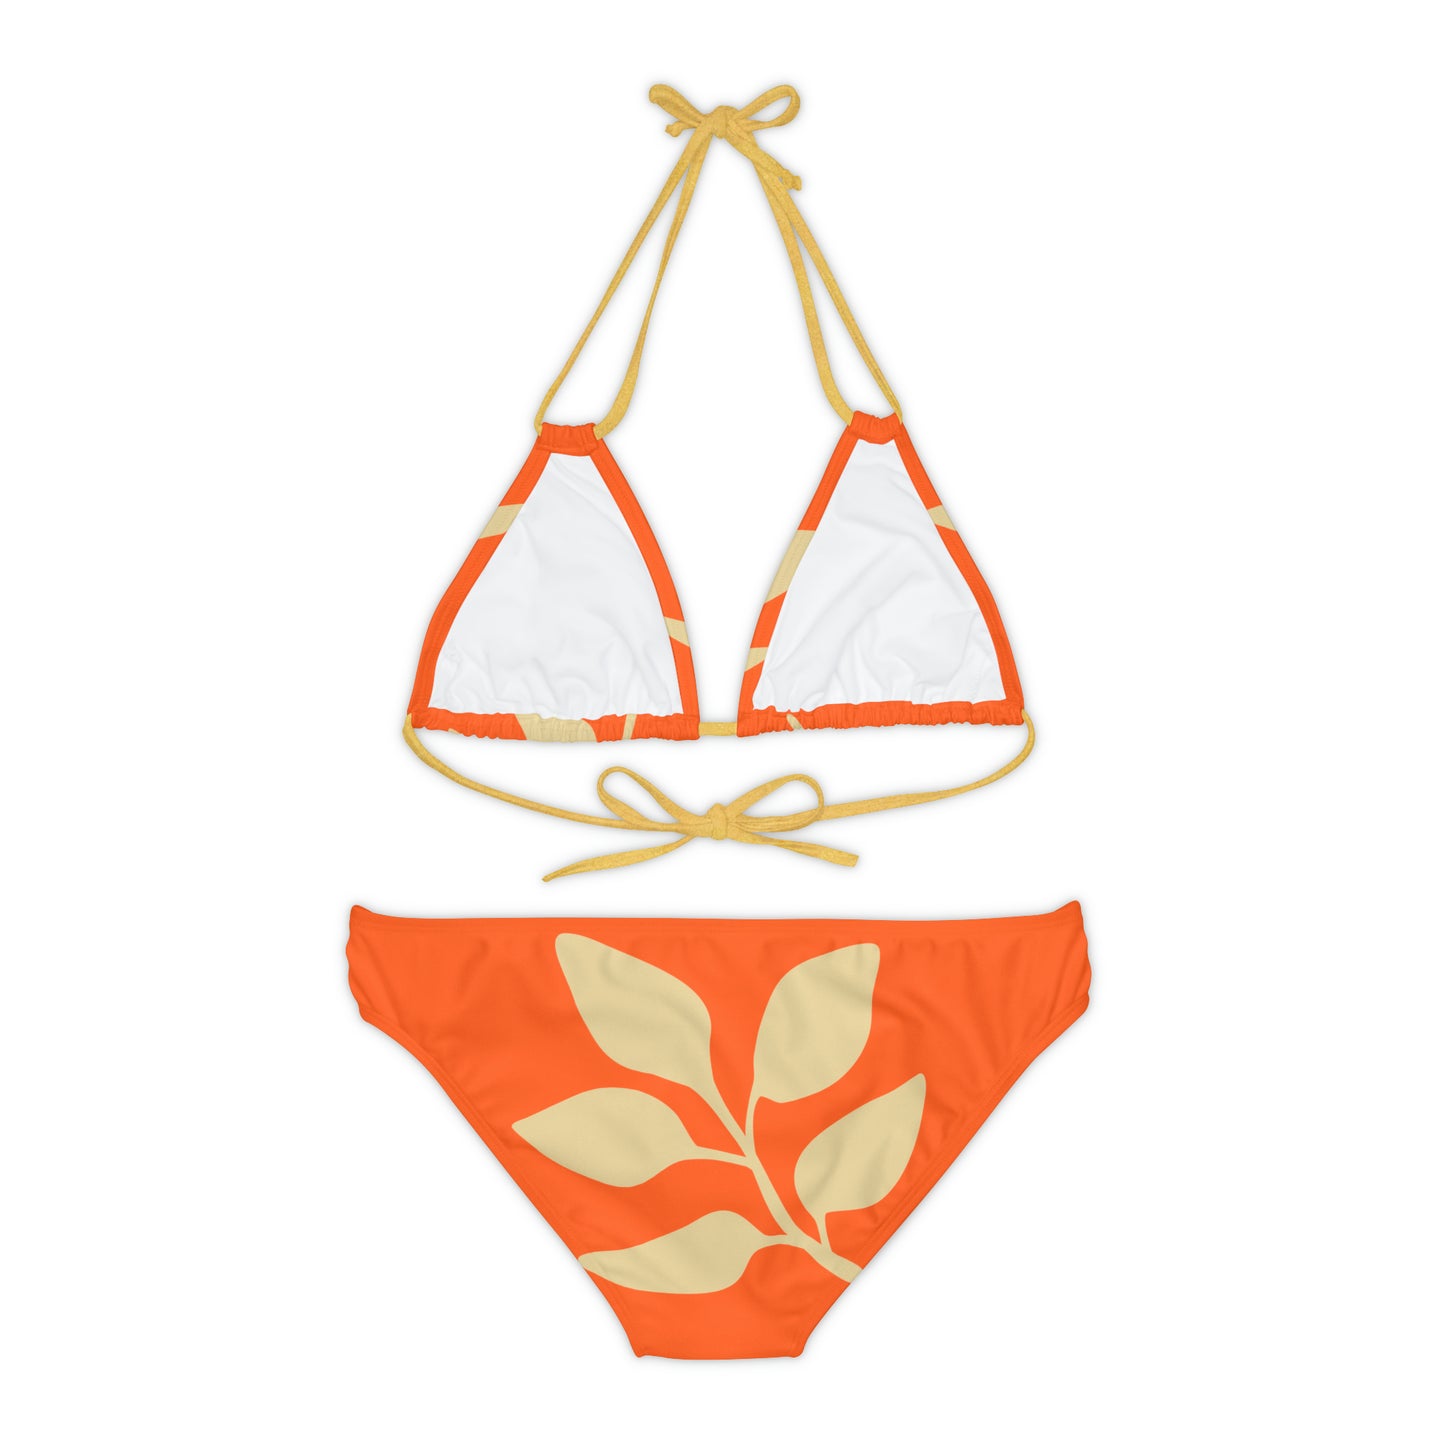 Orange Vintages Strappy Bikini Set Made with 4-way stretch Tricot (82% Microfiber, 18% Spandex), this strappy bikini set is the perfect companion to all summer escapades. With adjustable elastic straps for a perfect fit, this complete two-piece swimsuit to become an instant summer hit.   Shipping From USA To United States